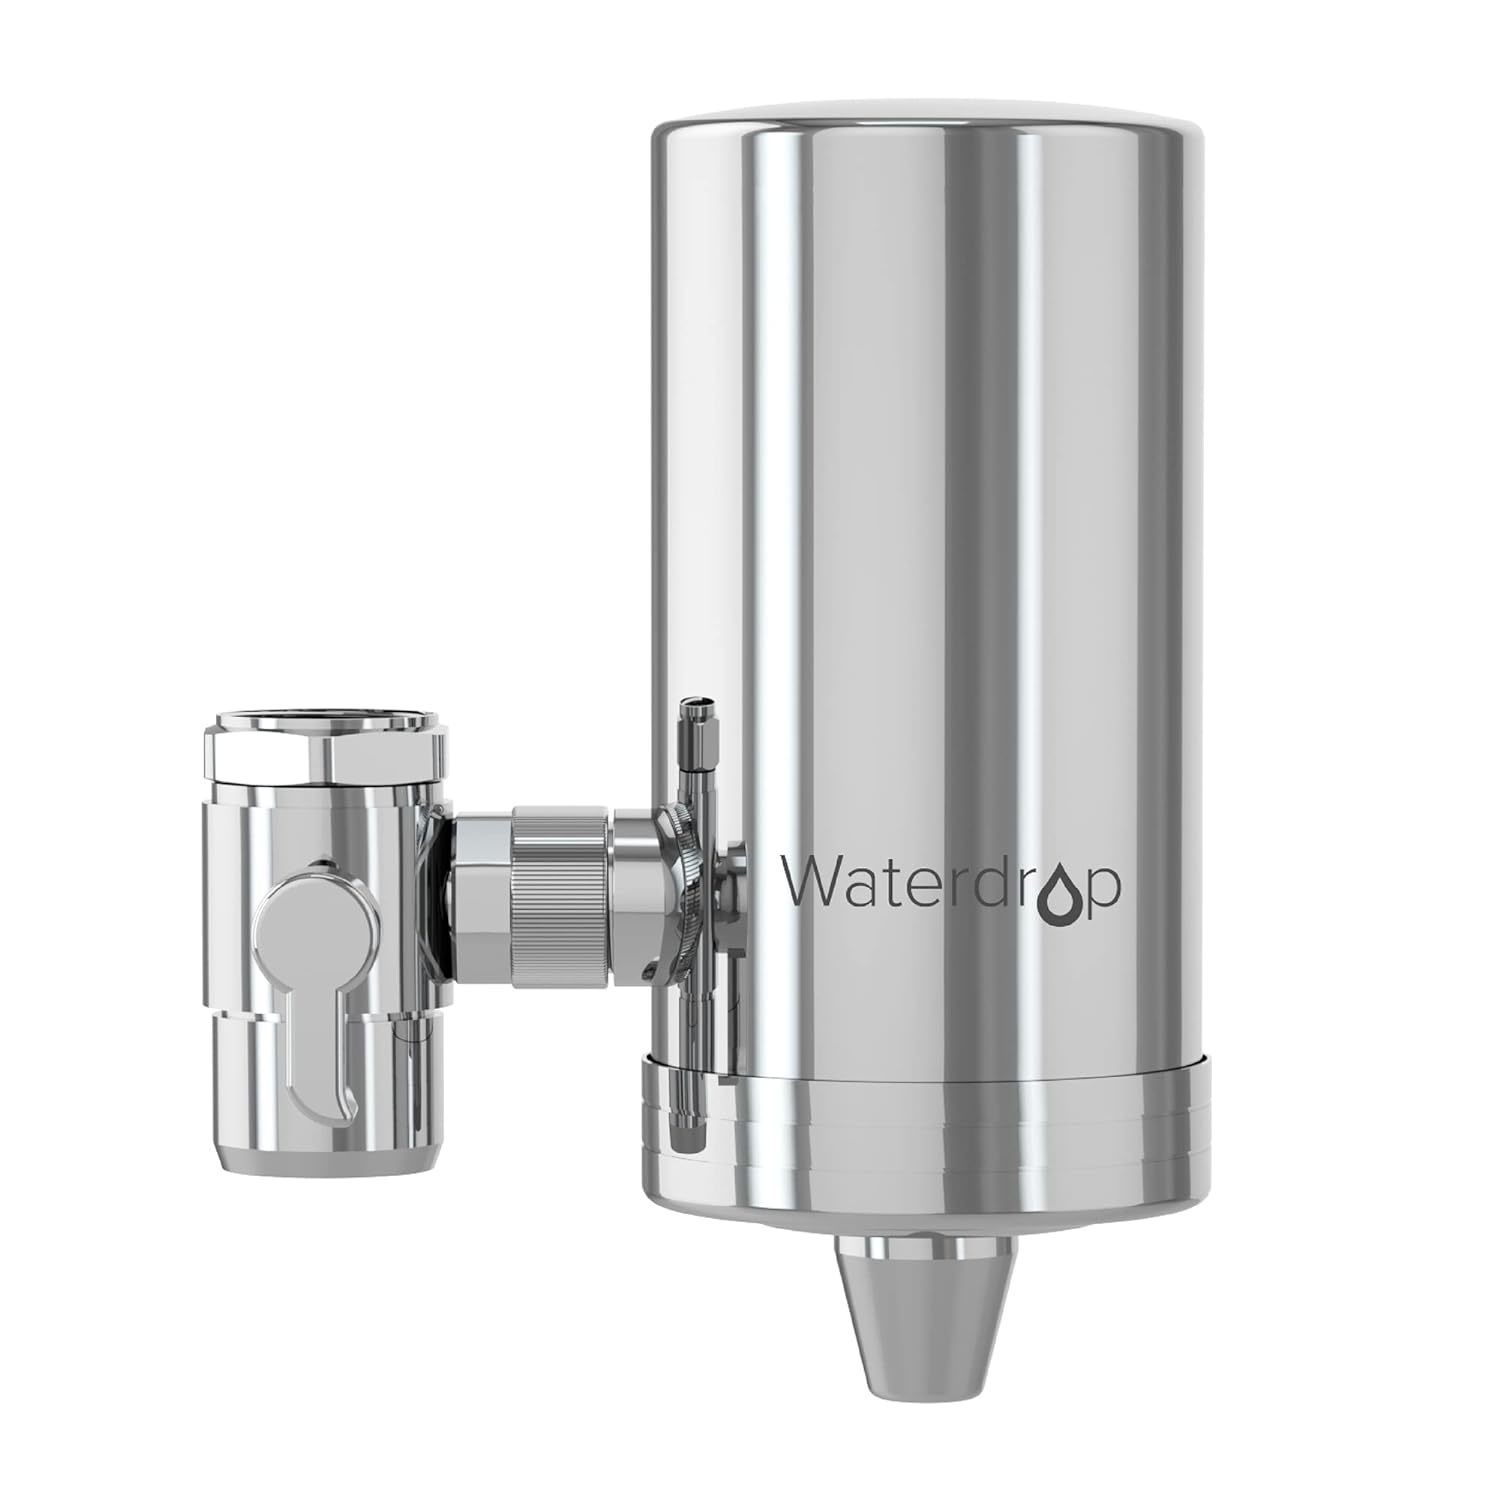 Primary image for Waterdrop Wd-Fc-06 Stainless-Steel Faucet Water Filter, Carbon Block Water